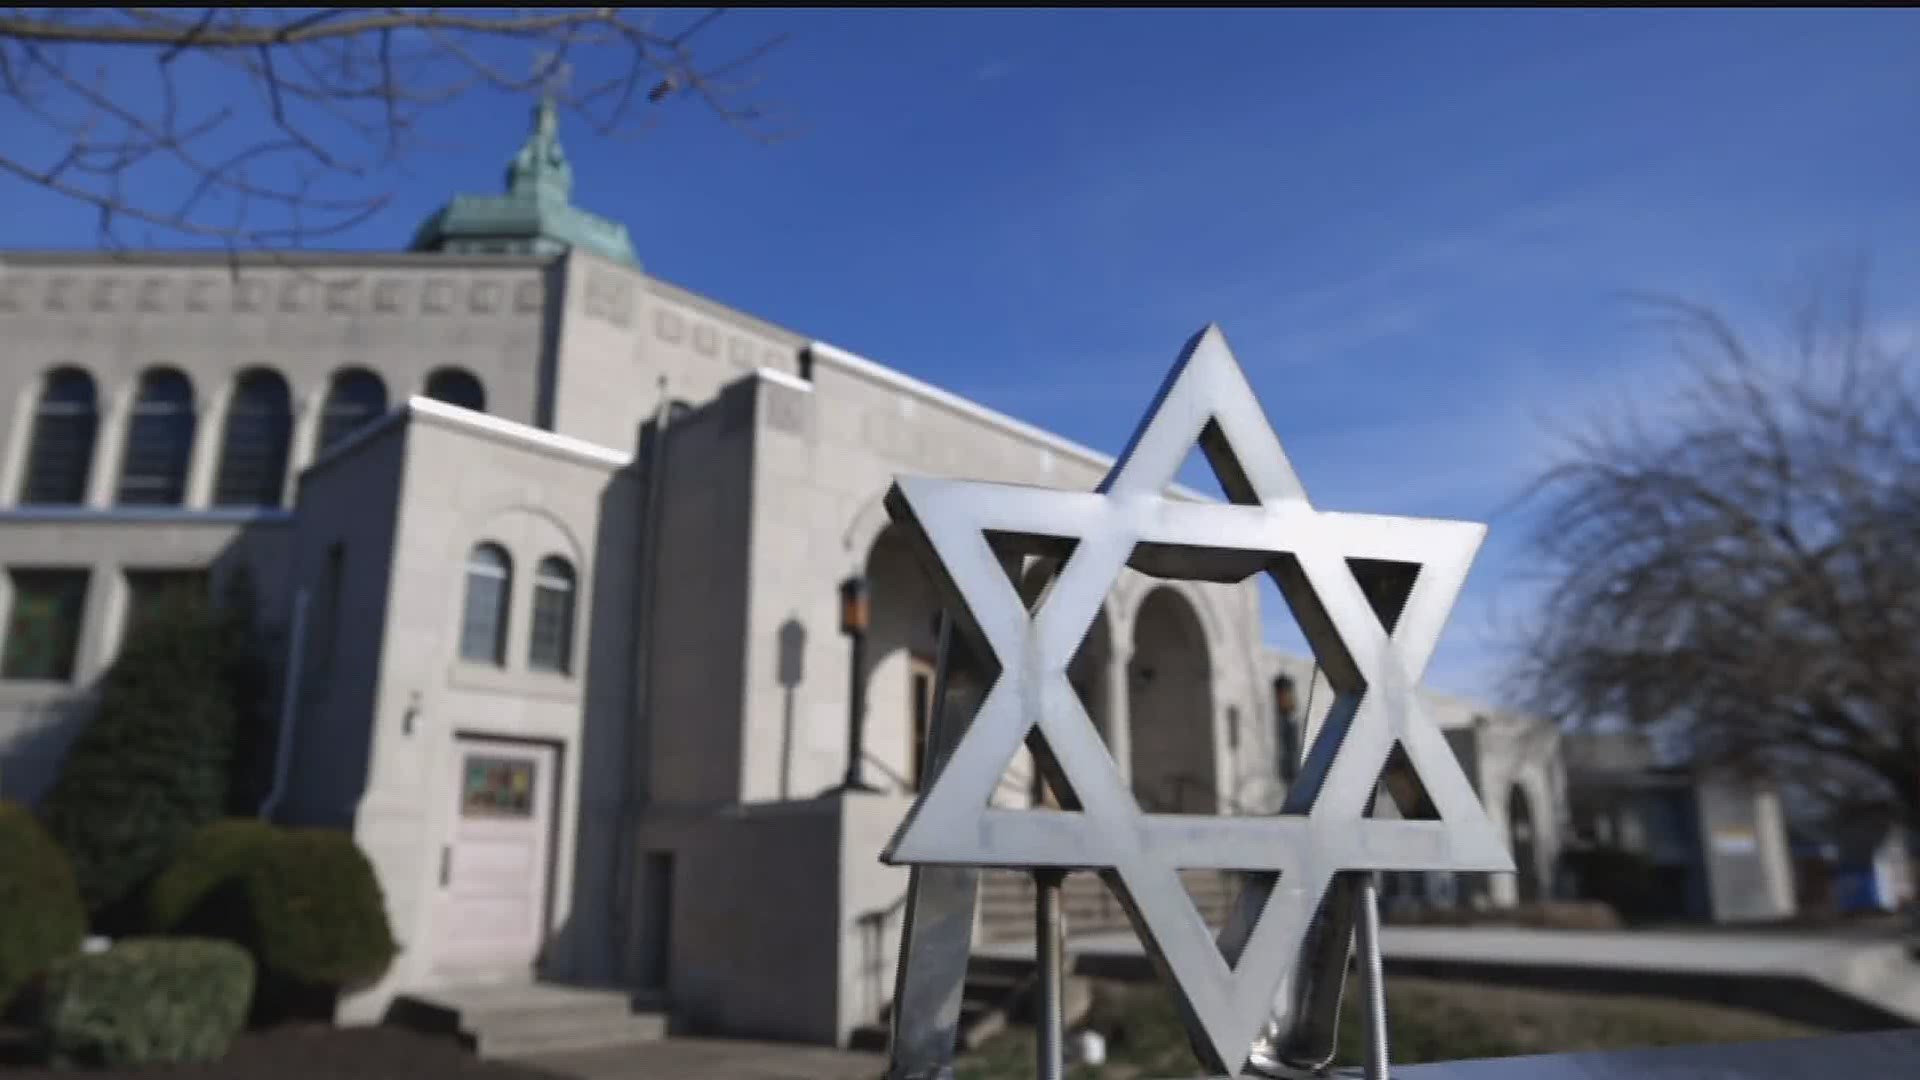 A growing list of places of worship are becoming the target of hate crimes, according to the FBI. The Harrisburg JCC hosted a “Protecting Places of Worship" forum.o